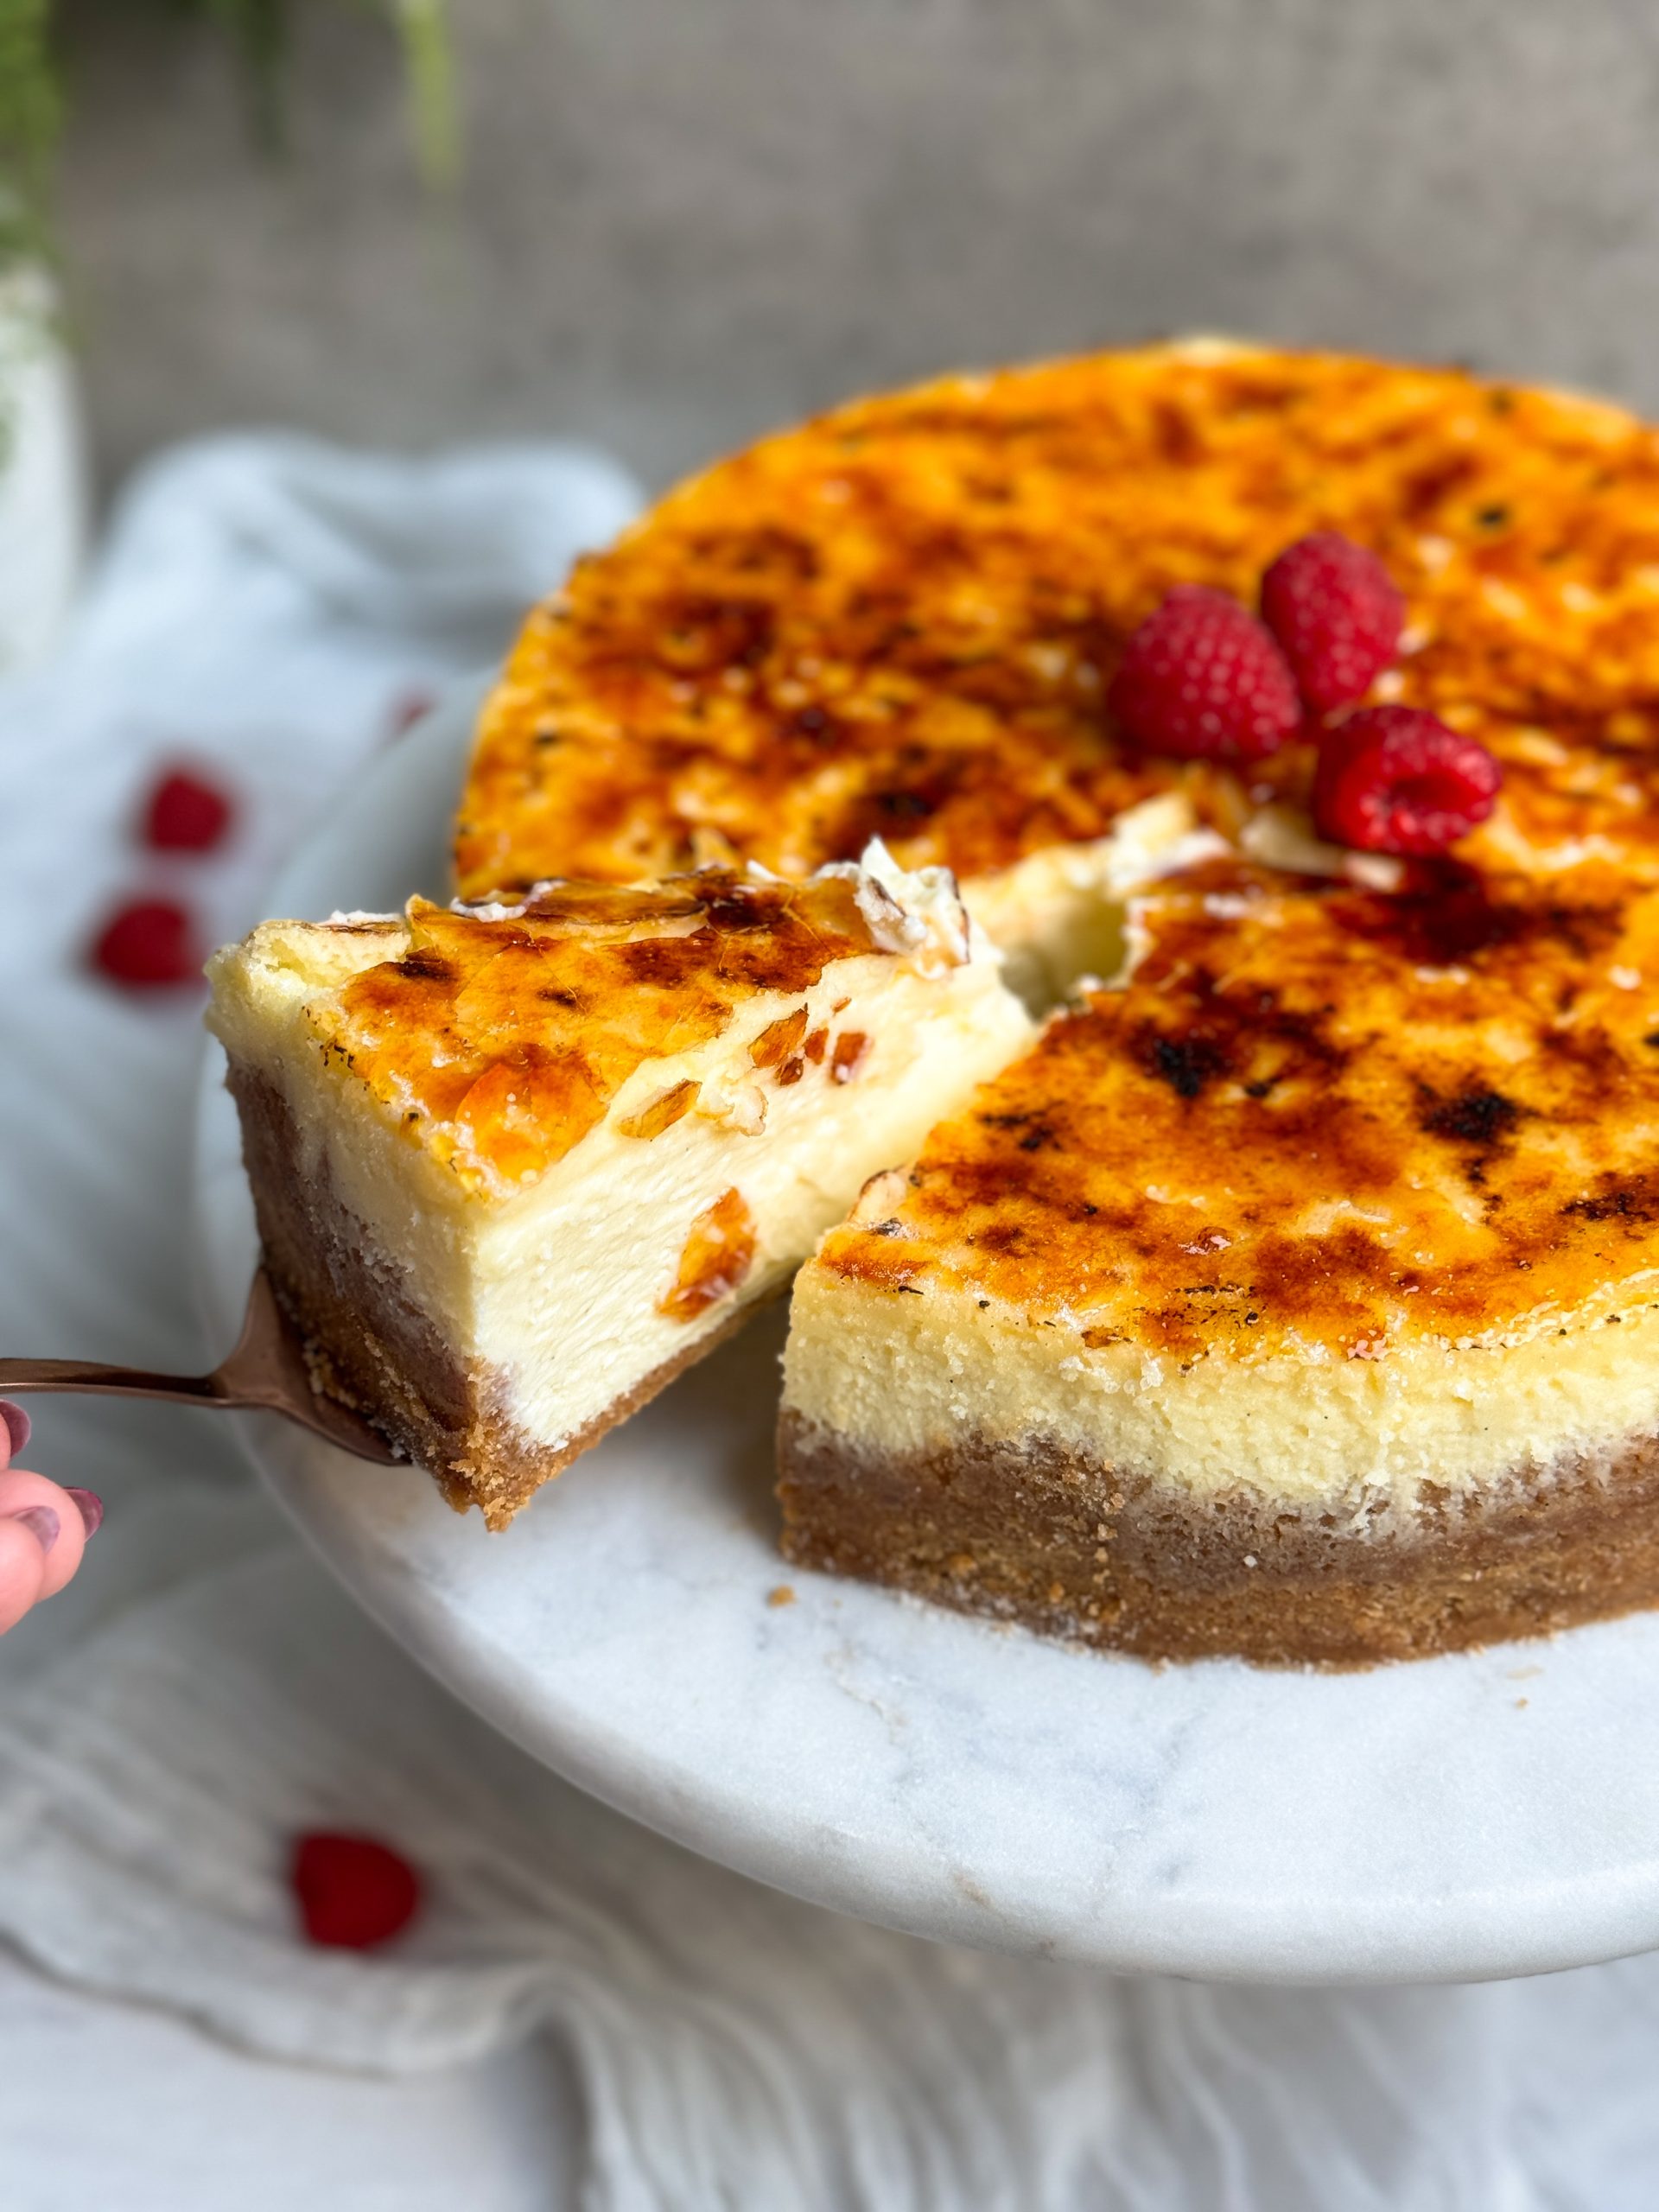 creme brulee cheesecake with a golden crispy top on a marble serving board, decorated with some raspberries. a spatula is pulling out a slice showing the creamy texture of the cheesecake